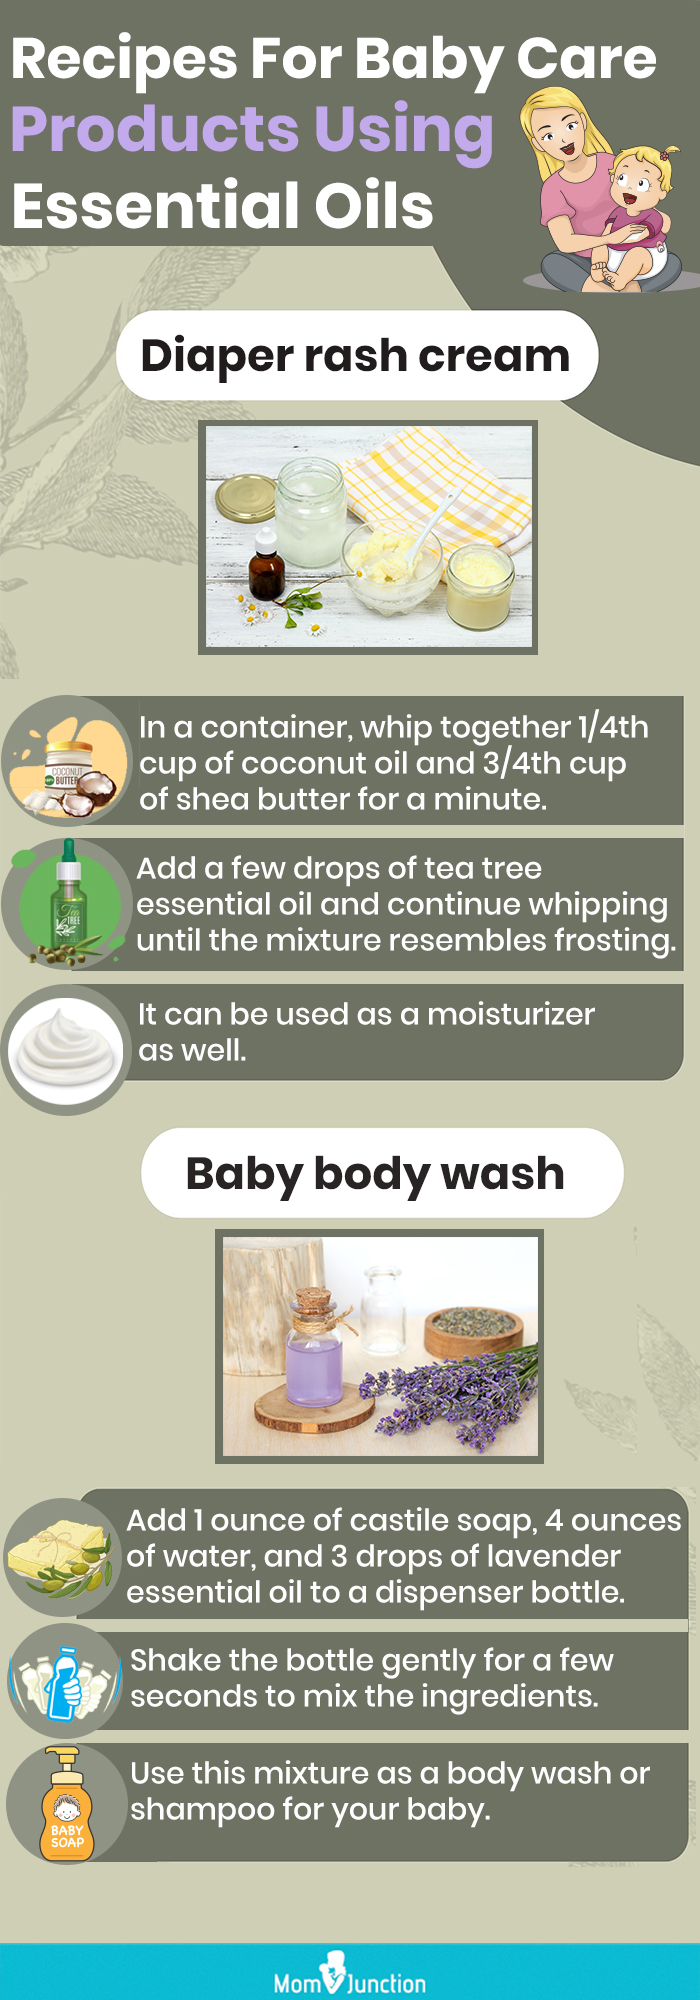 recipes for baby care products using essential oils [infographic]